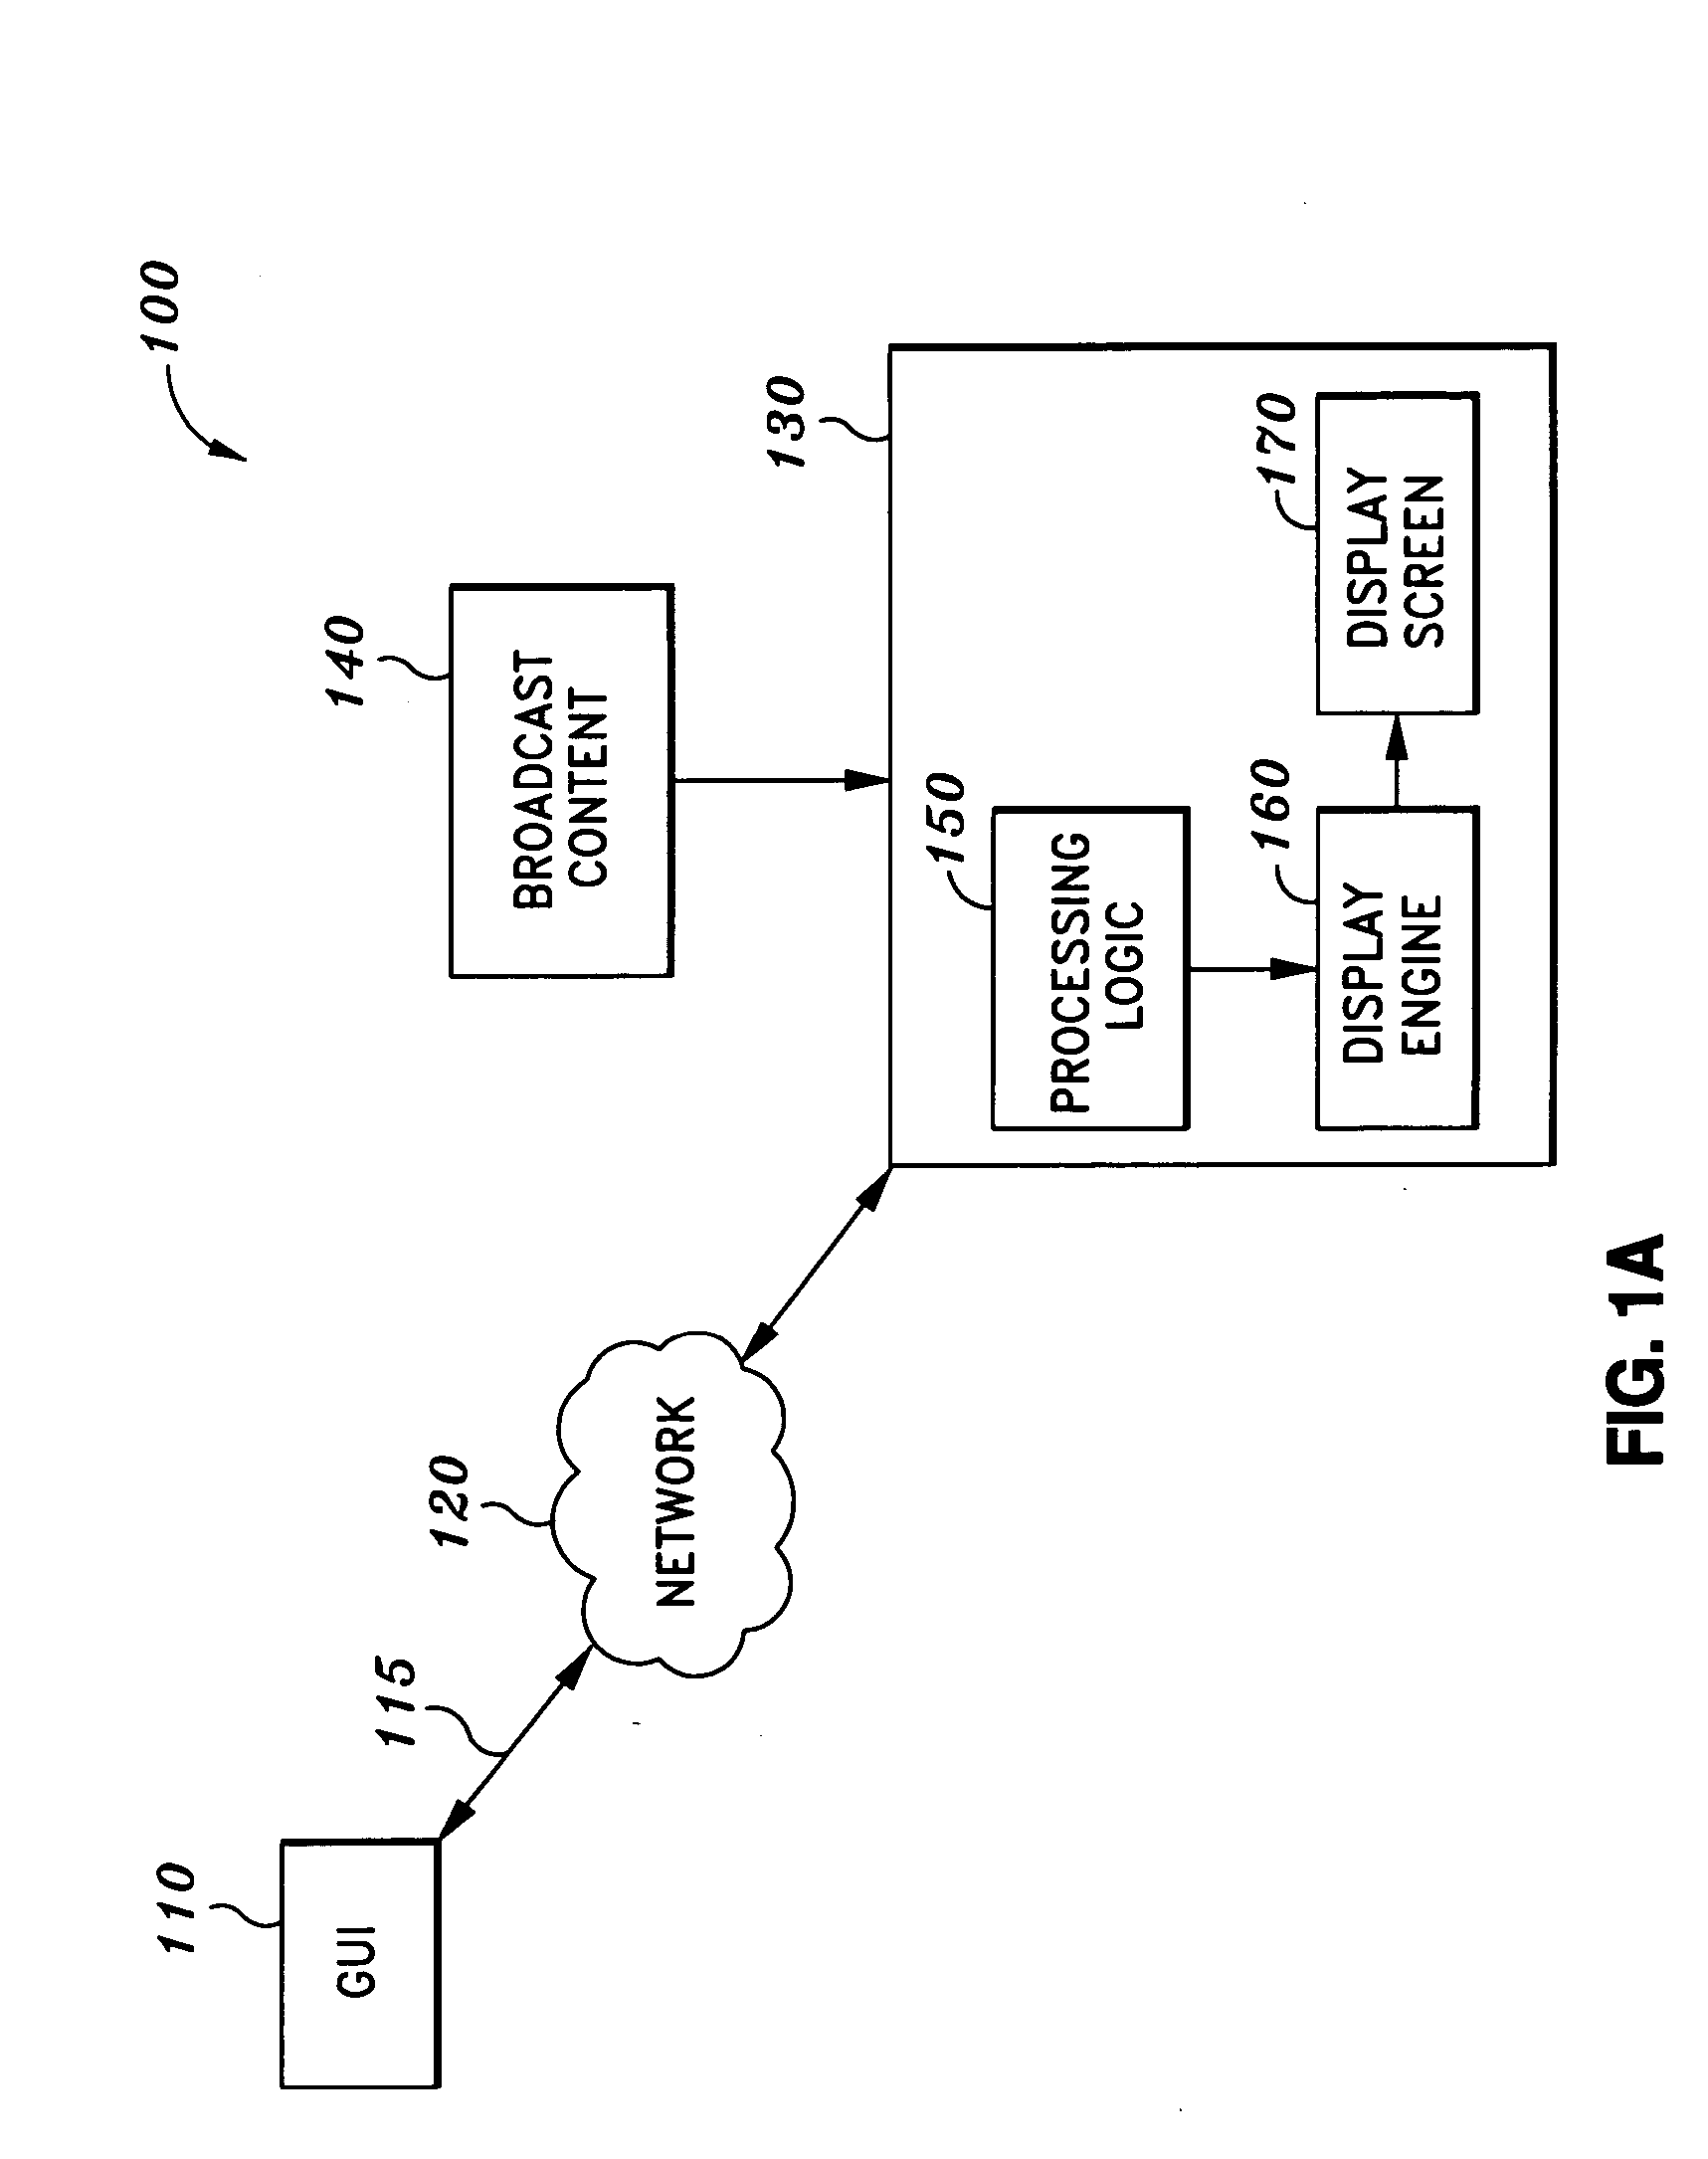 System and method for customizing a multimedia interface